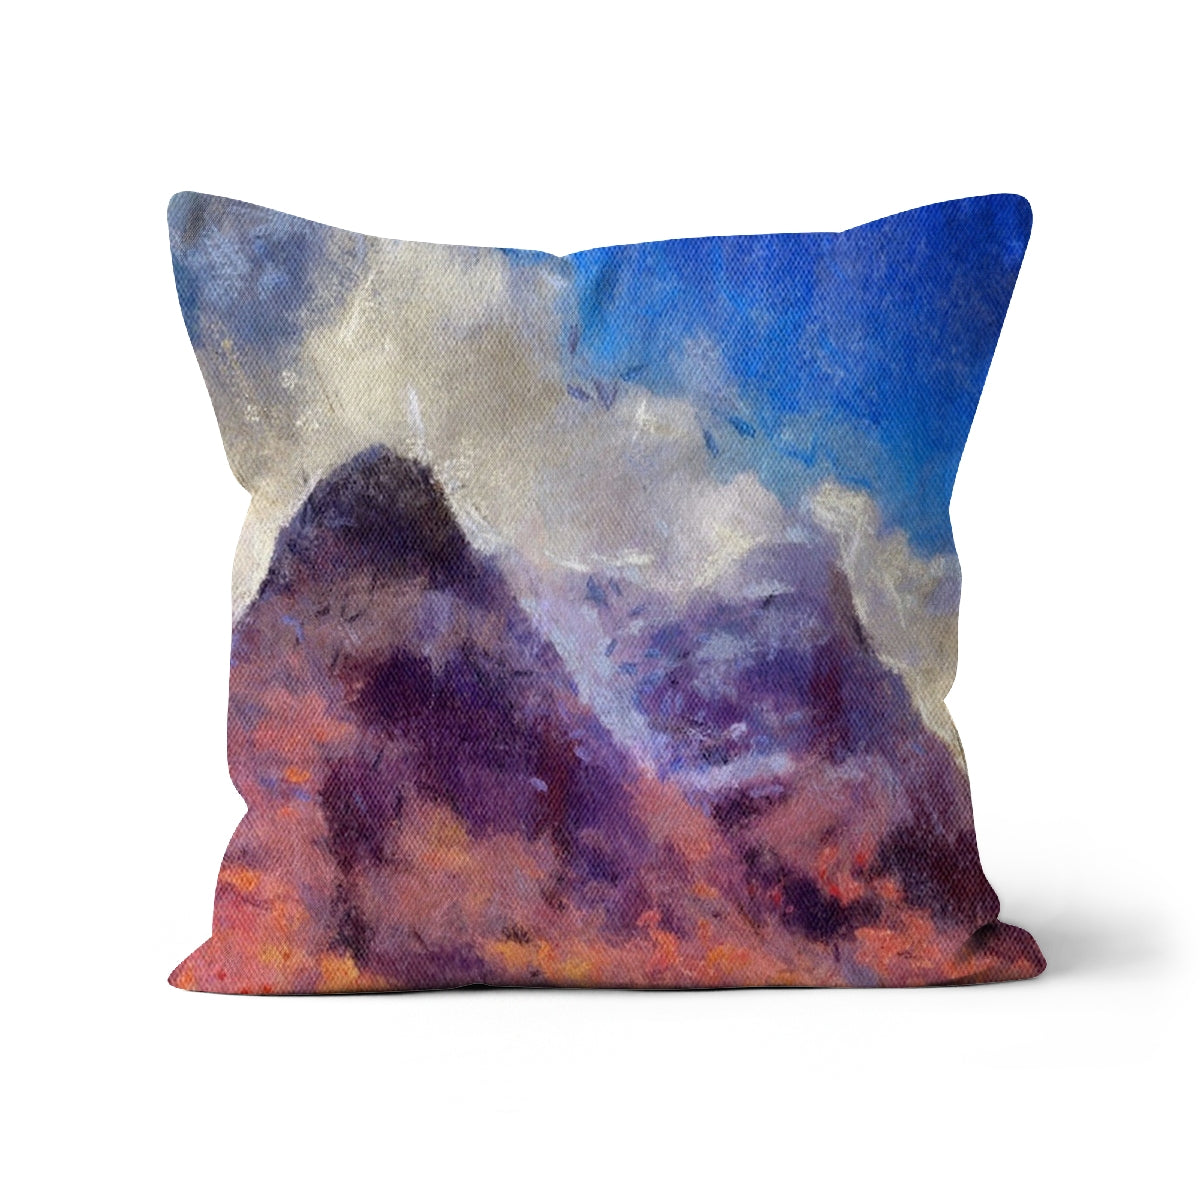 Glencoe Art Gifts Cushion-Cushions-Glencoe Art Gallery-Faux Suede-18"x18"-Paintings, Prints, Homeware, Art Gifts From Scotland By Scottish Artist Kevin Hunter